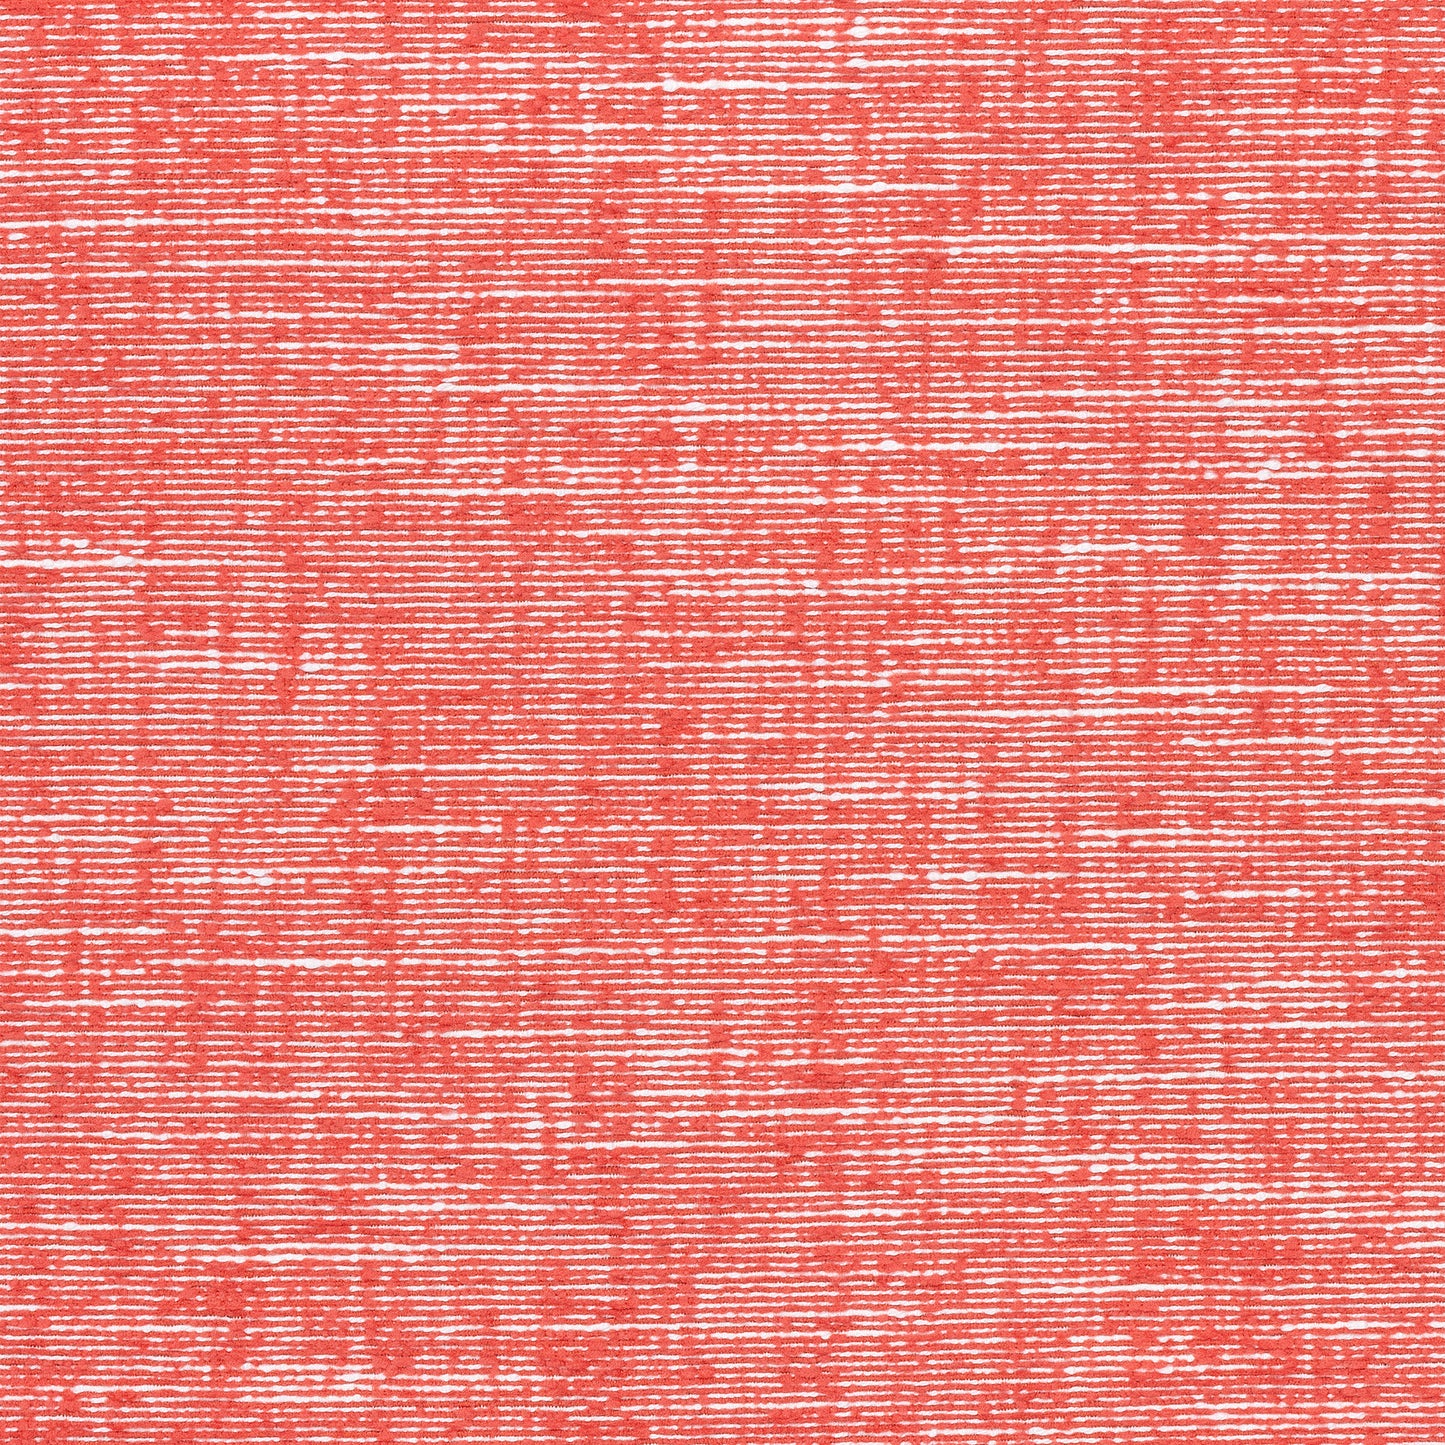 Purchase Thibaut Fabric Product# W74606 pattern name Freeport color Coral